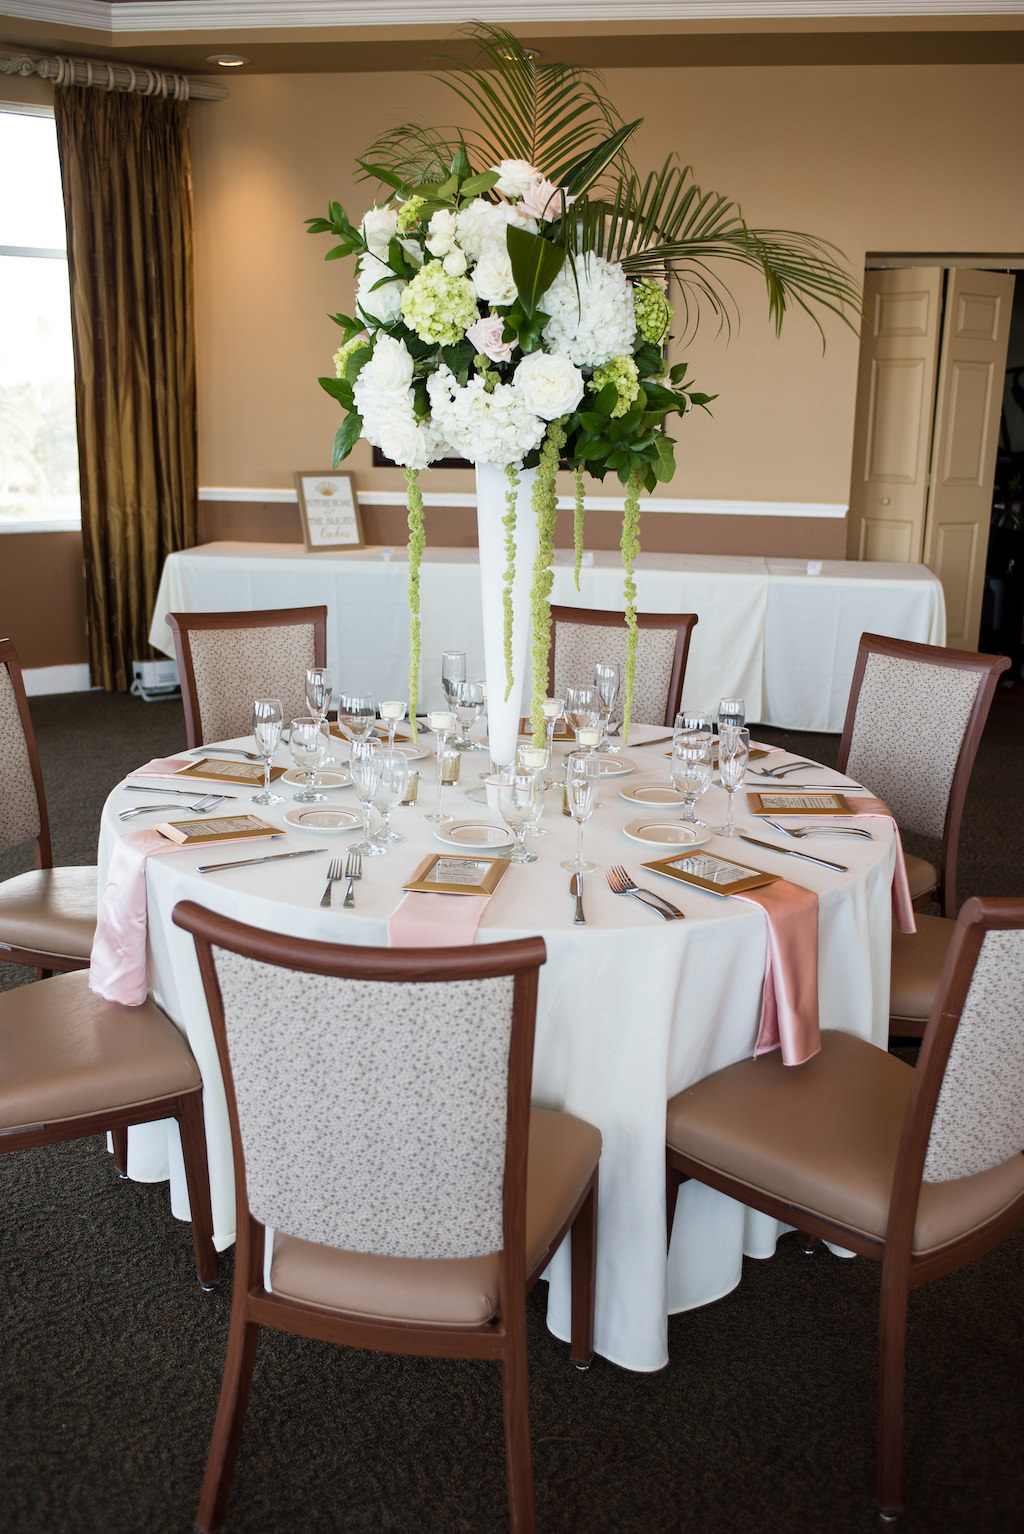 Classic Traditional Ballroom Wedding Reception Decor, Round Table with White Tablecloth, Blush Pink Linens, Tall White Vase with White, Blush Pink, Greenery, Palm Tree Branches and Green Hanging Amaranthus Floral Centerpiece | St. Petersburg Wedding Venue Isla Del Sol Yacht and Country Club